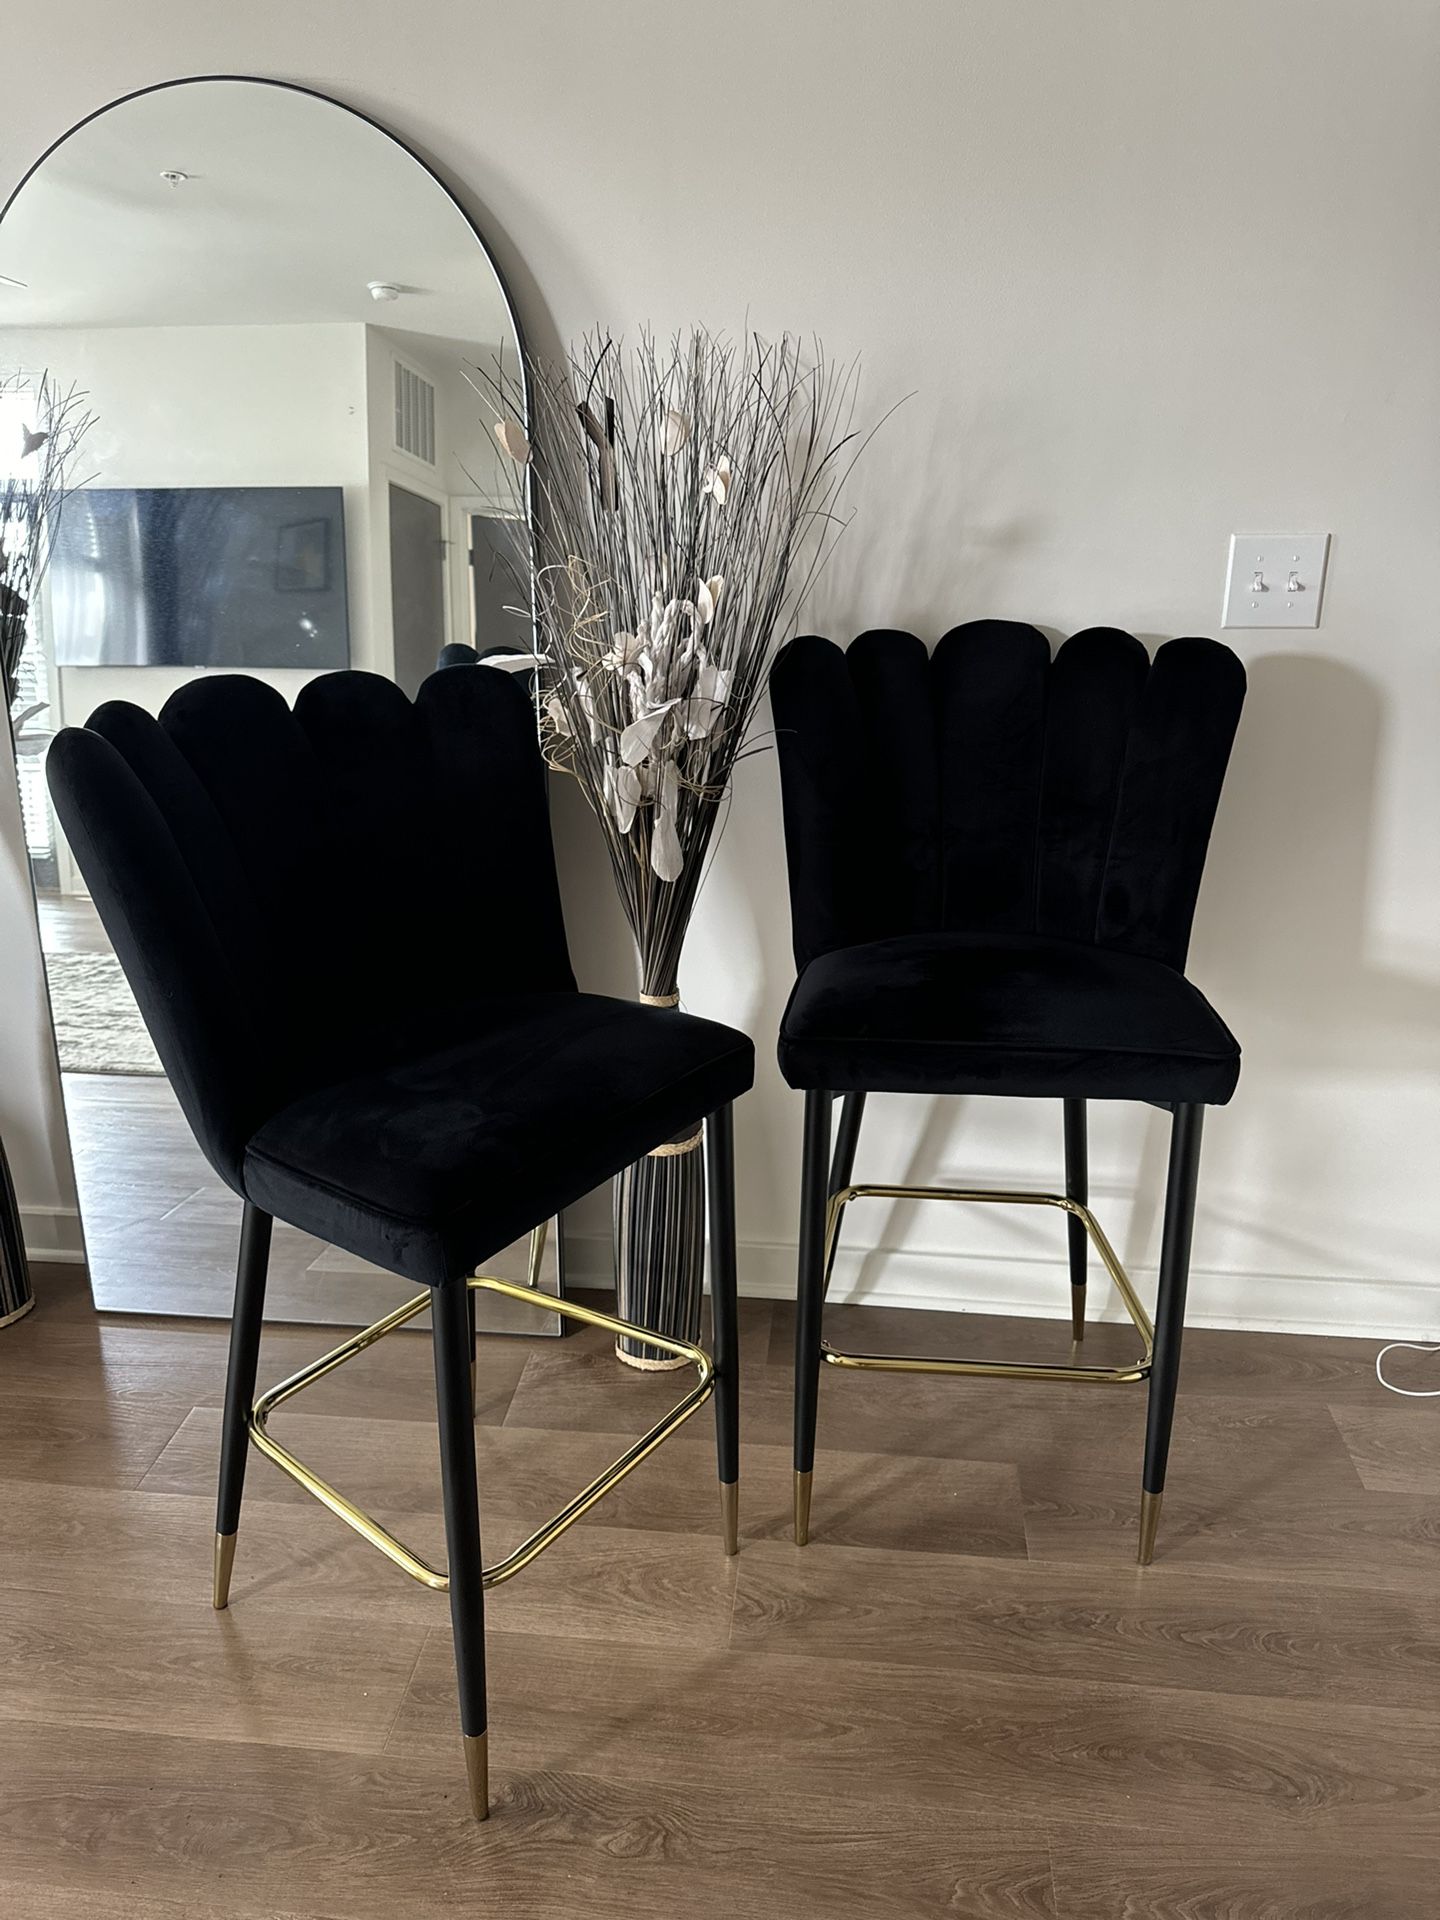 Black Suede Bar/counter Stools 